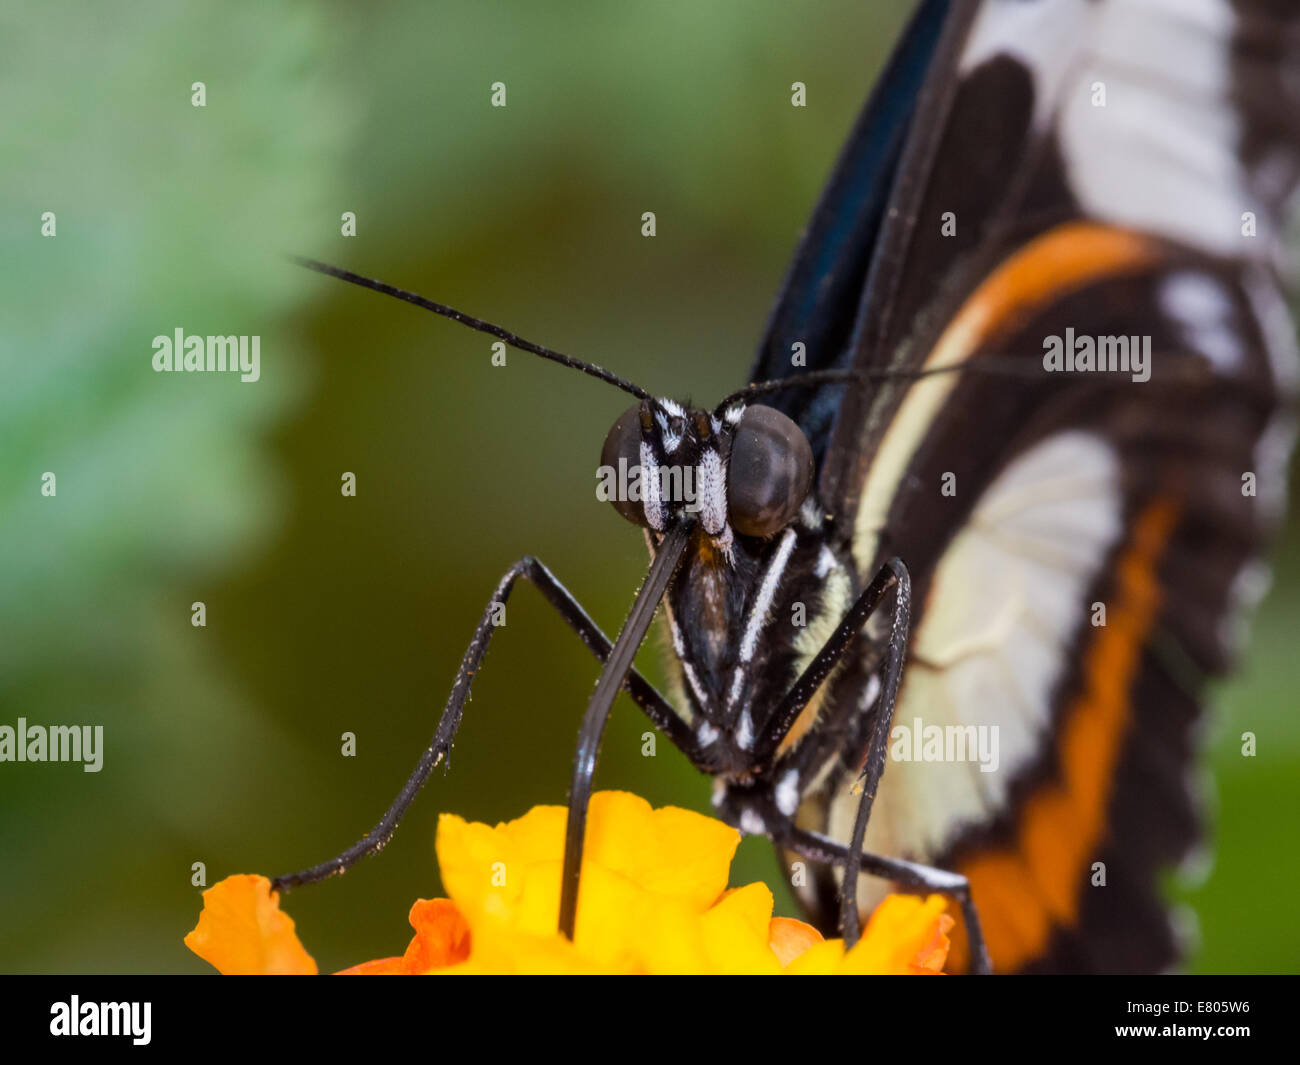 Extreme closeup of a white, black and orange butterfly on a yellow flower Stock Photo